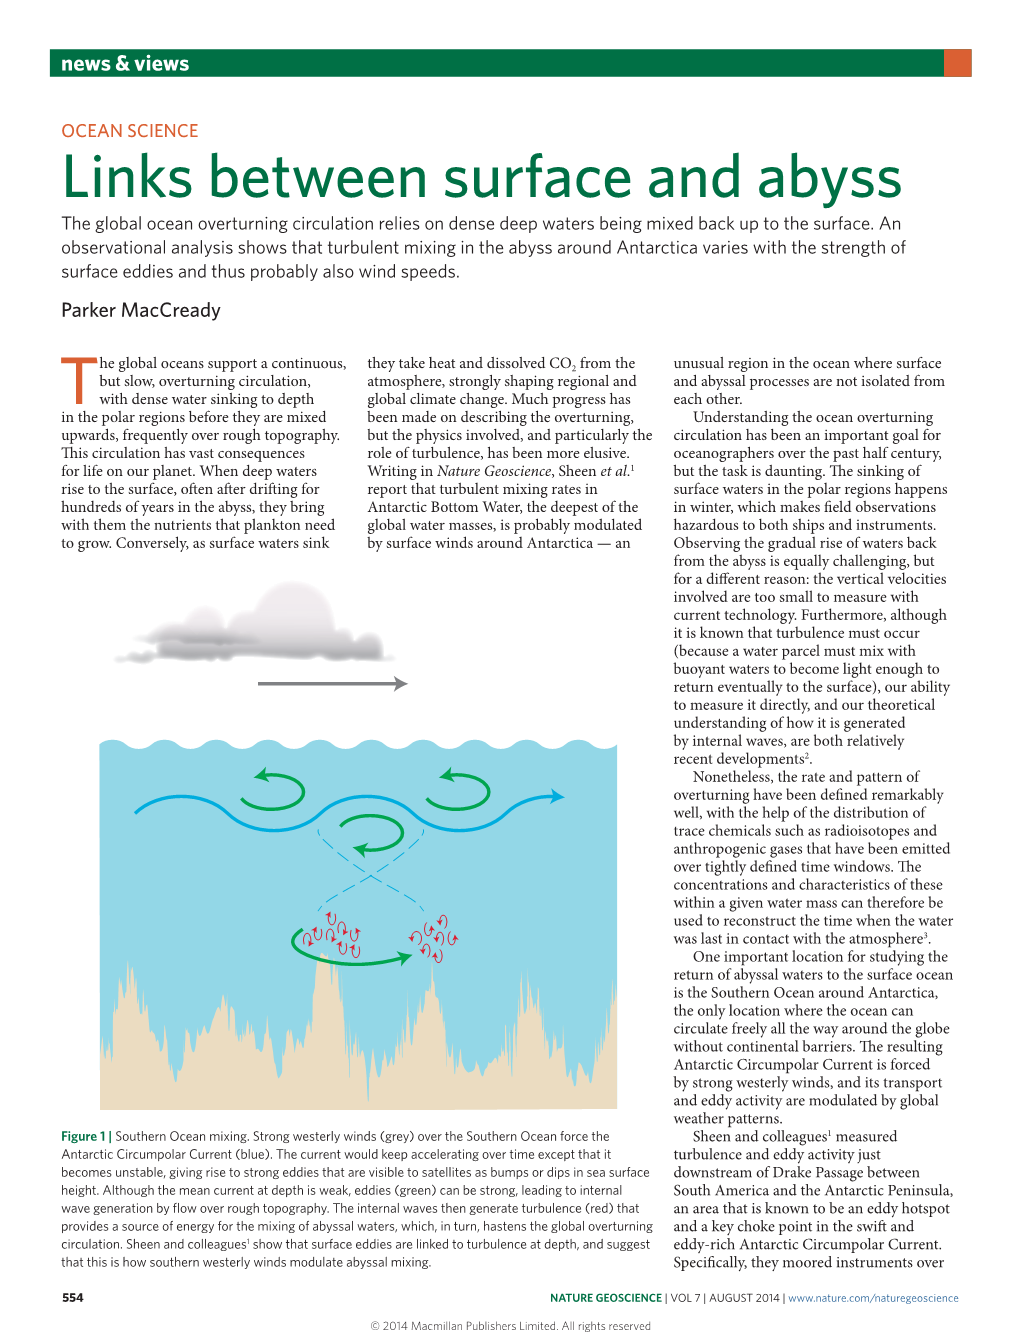 Ocean Science: Links Between Surface and Abyss